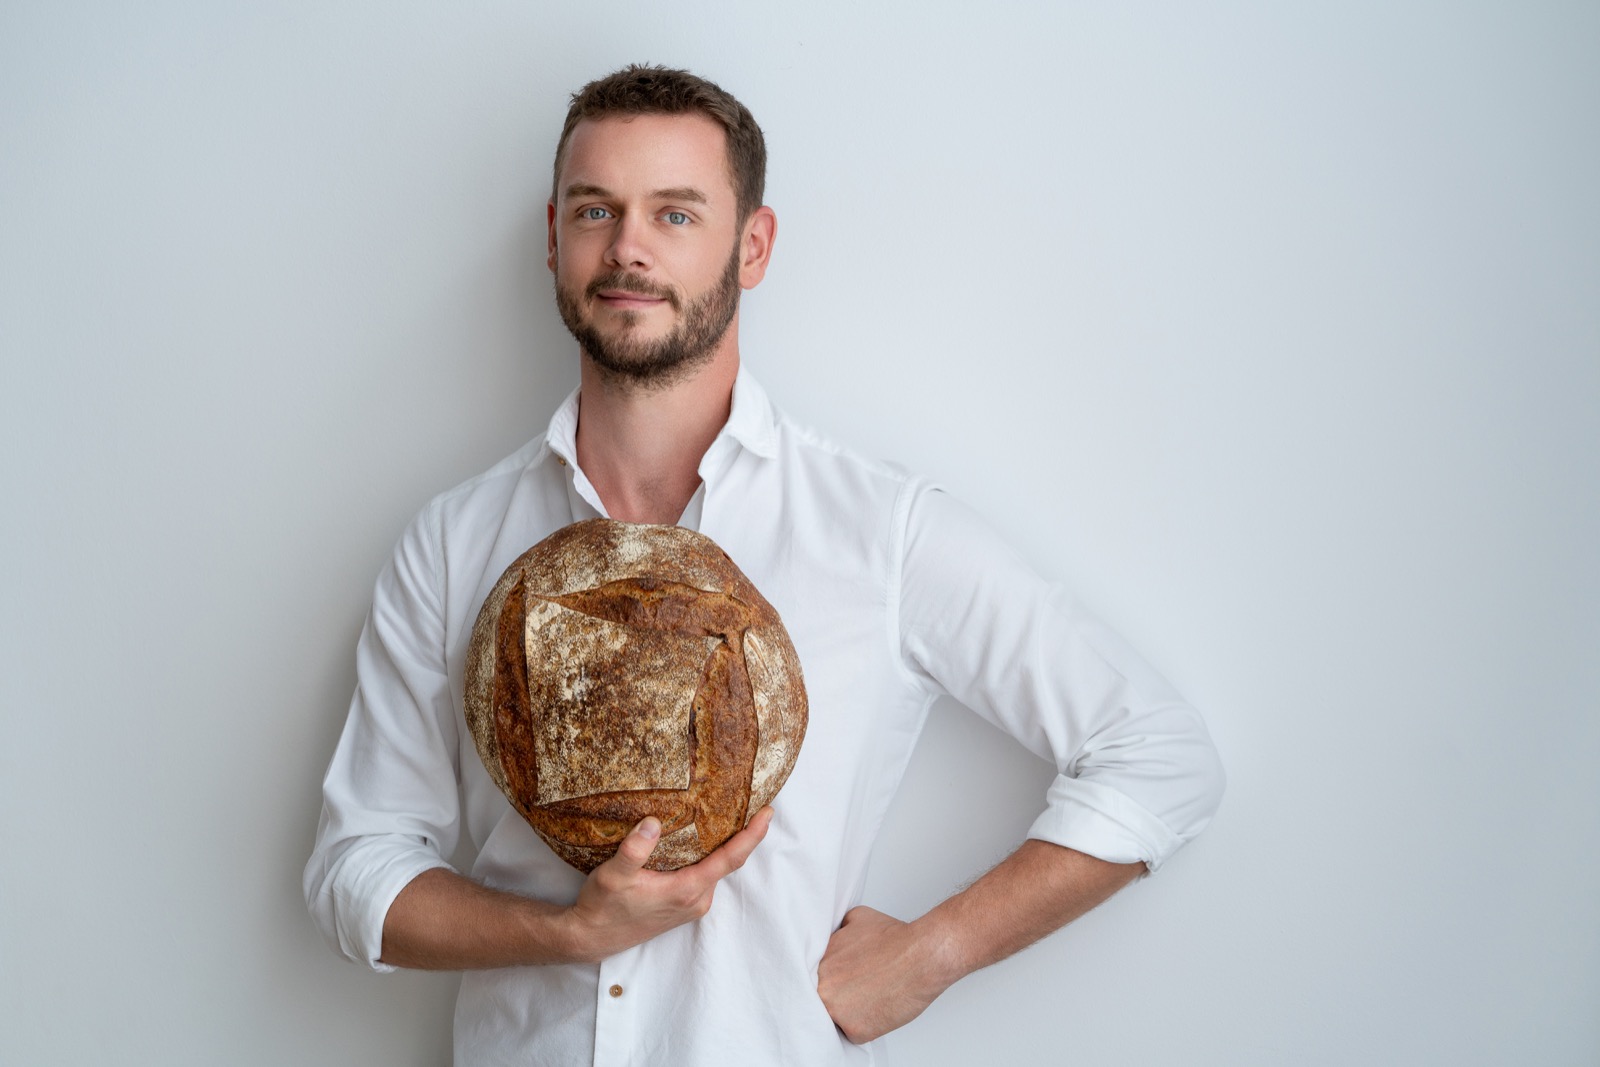 Make your own sourdough at home in 4 simple steps - a recipe by Tom Rees